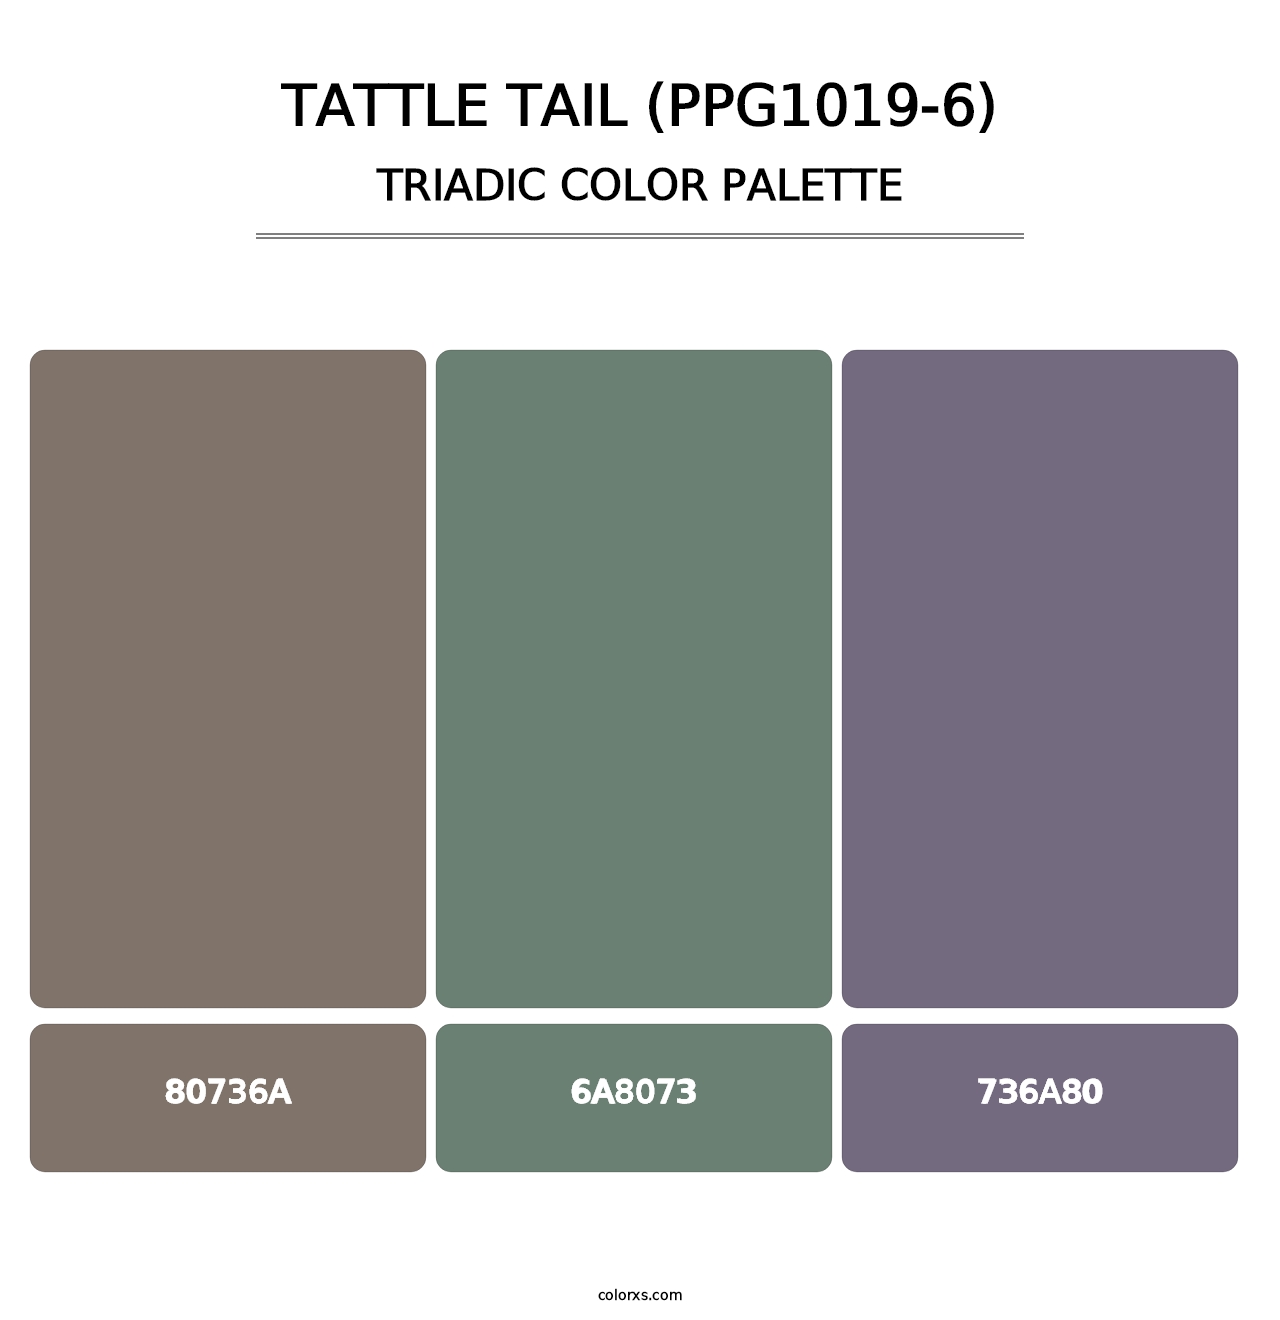 Tattle Tail (PPG1019-6) - Triadic Color Palette